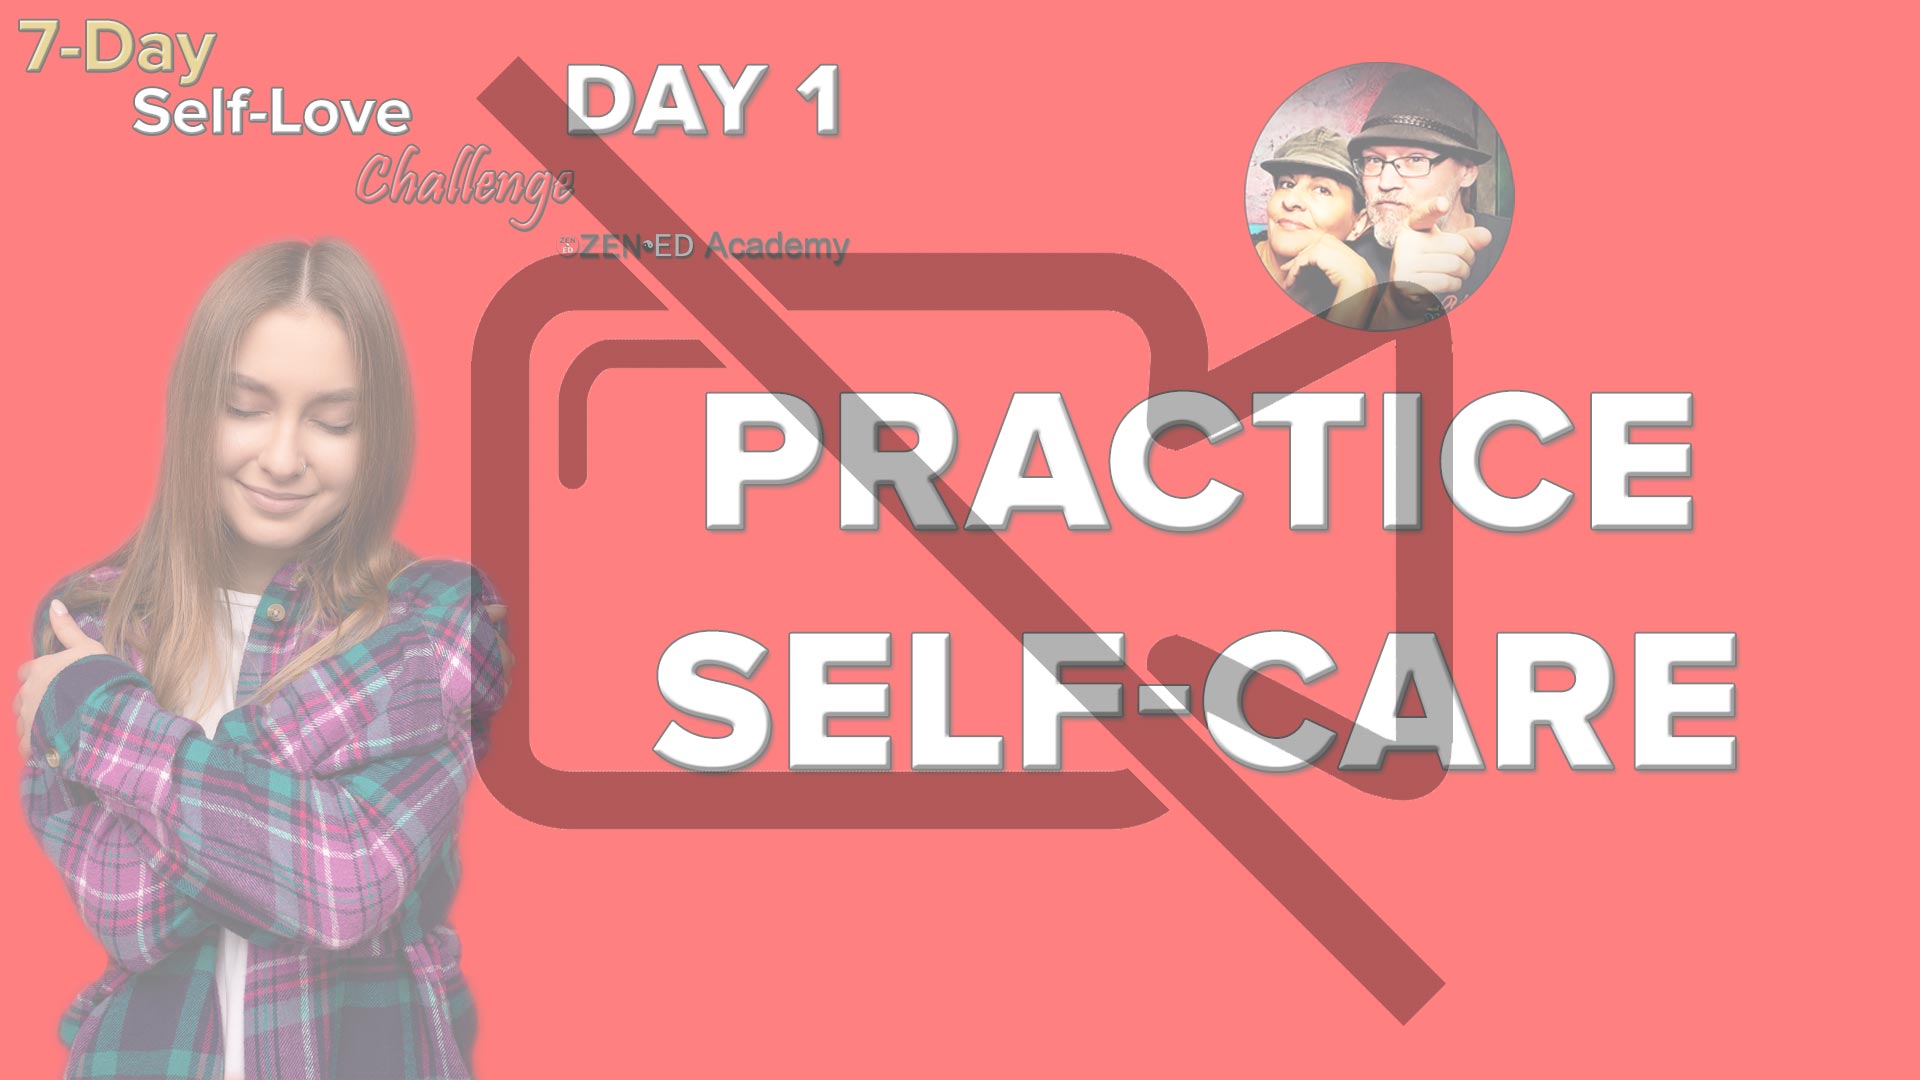 Inactive Video Day 1: Practice Self-Care (Thumbnail) Zen Ed Academy's Free 7-Day Self-Love Challenge